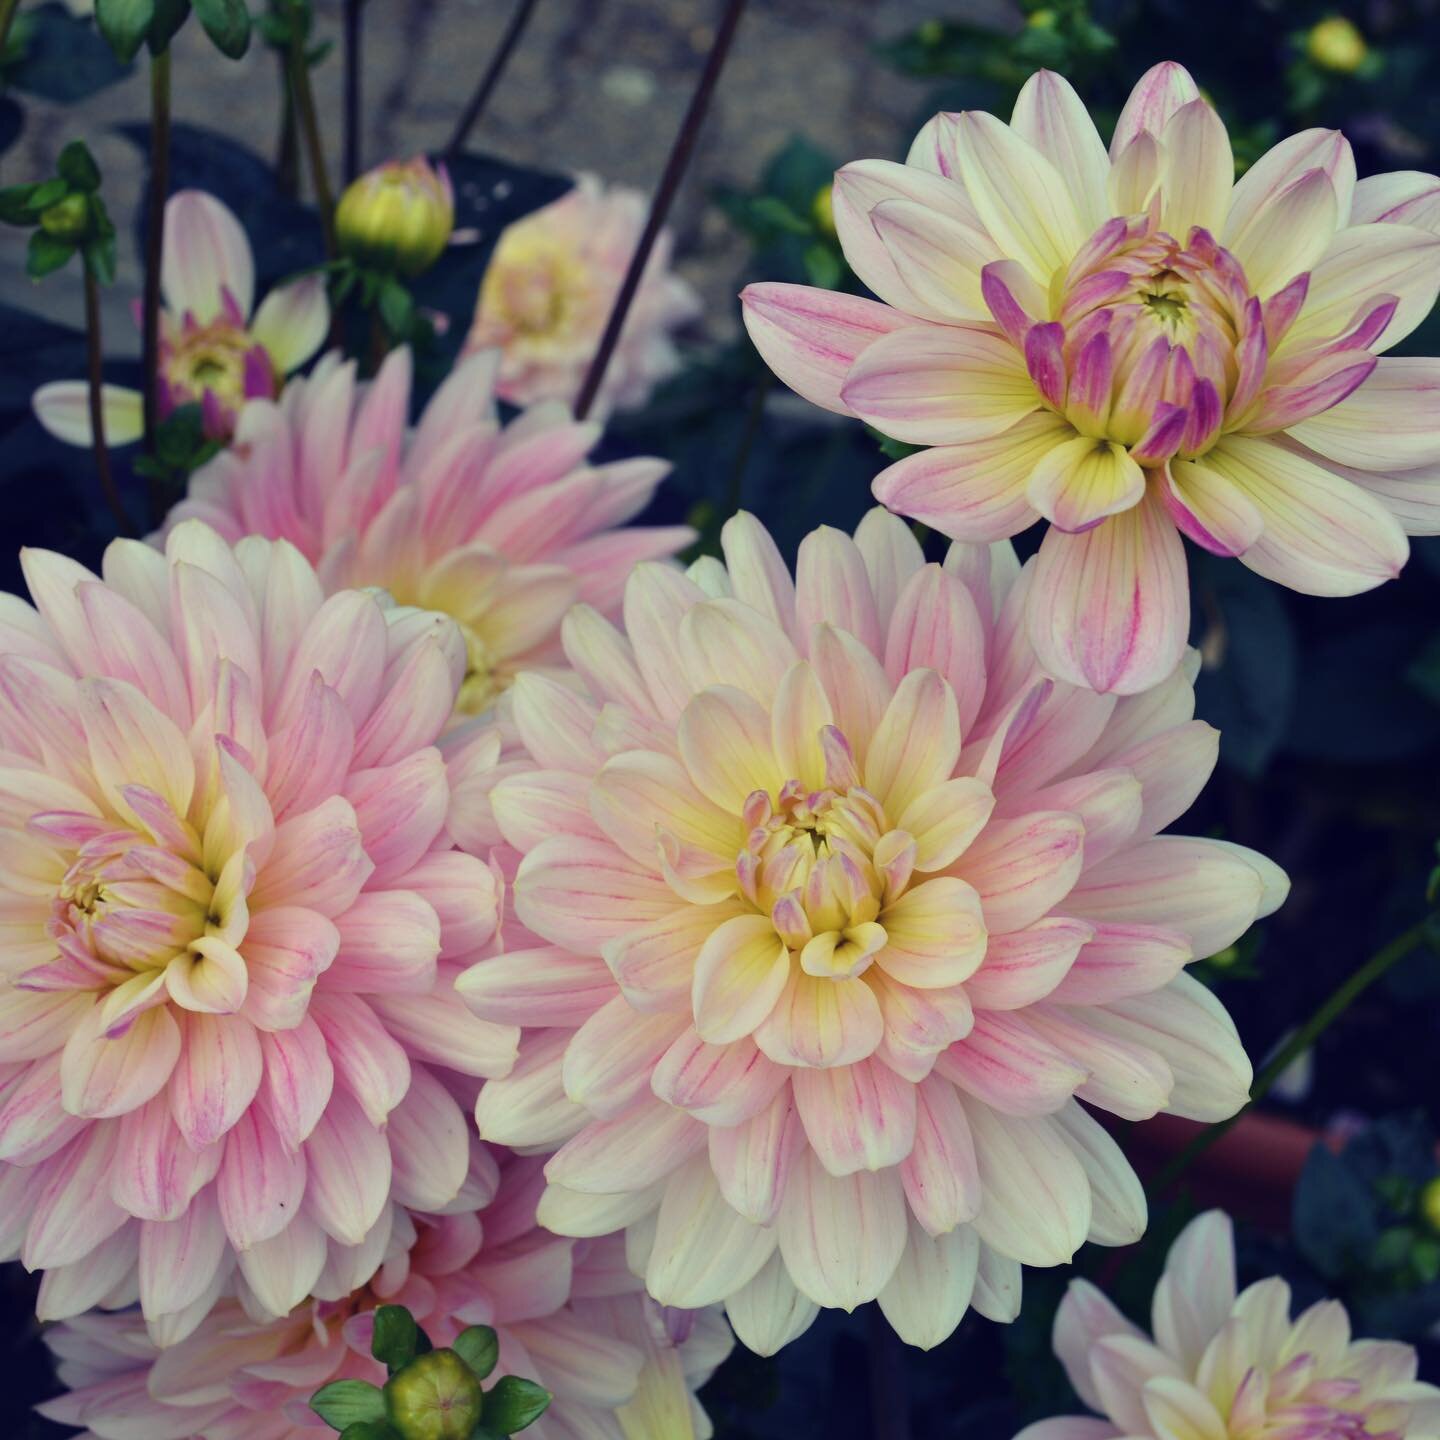 Dahlia inspiration from @rhswisley 

I took these a few years ago.
Every September they have a flower festival. The national dahlia society have a marquee full of dreamy dahlias! 
.
.
.
#dahlia #dahliaseason #wisley #wisleygardens #floralinspiration 